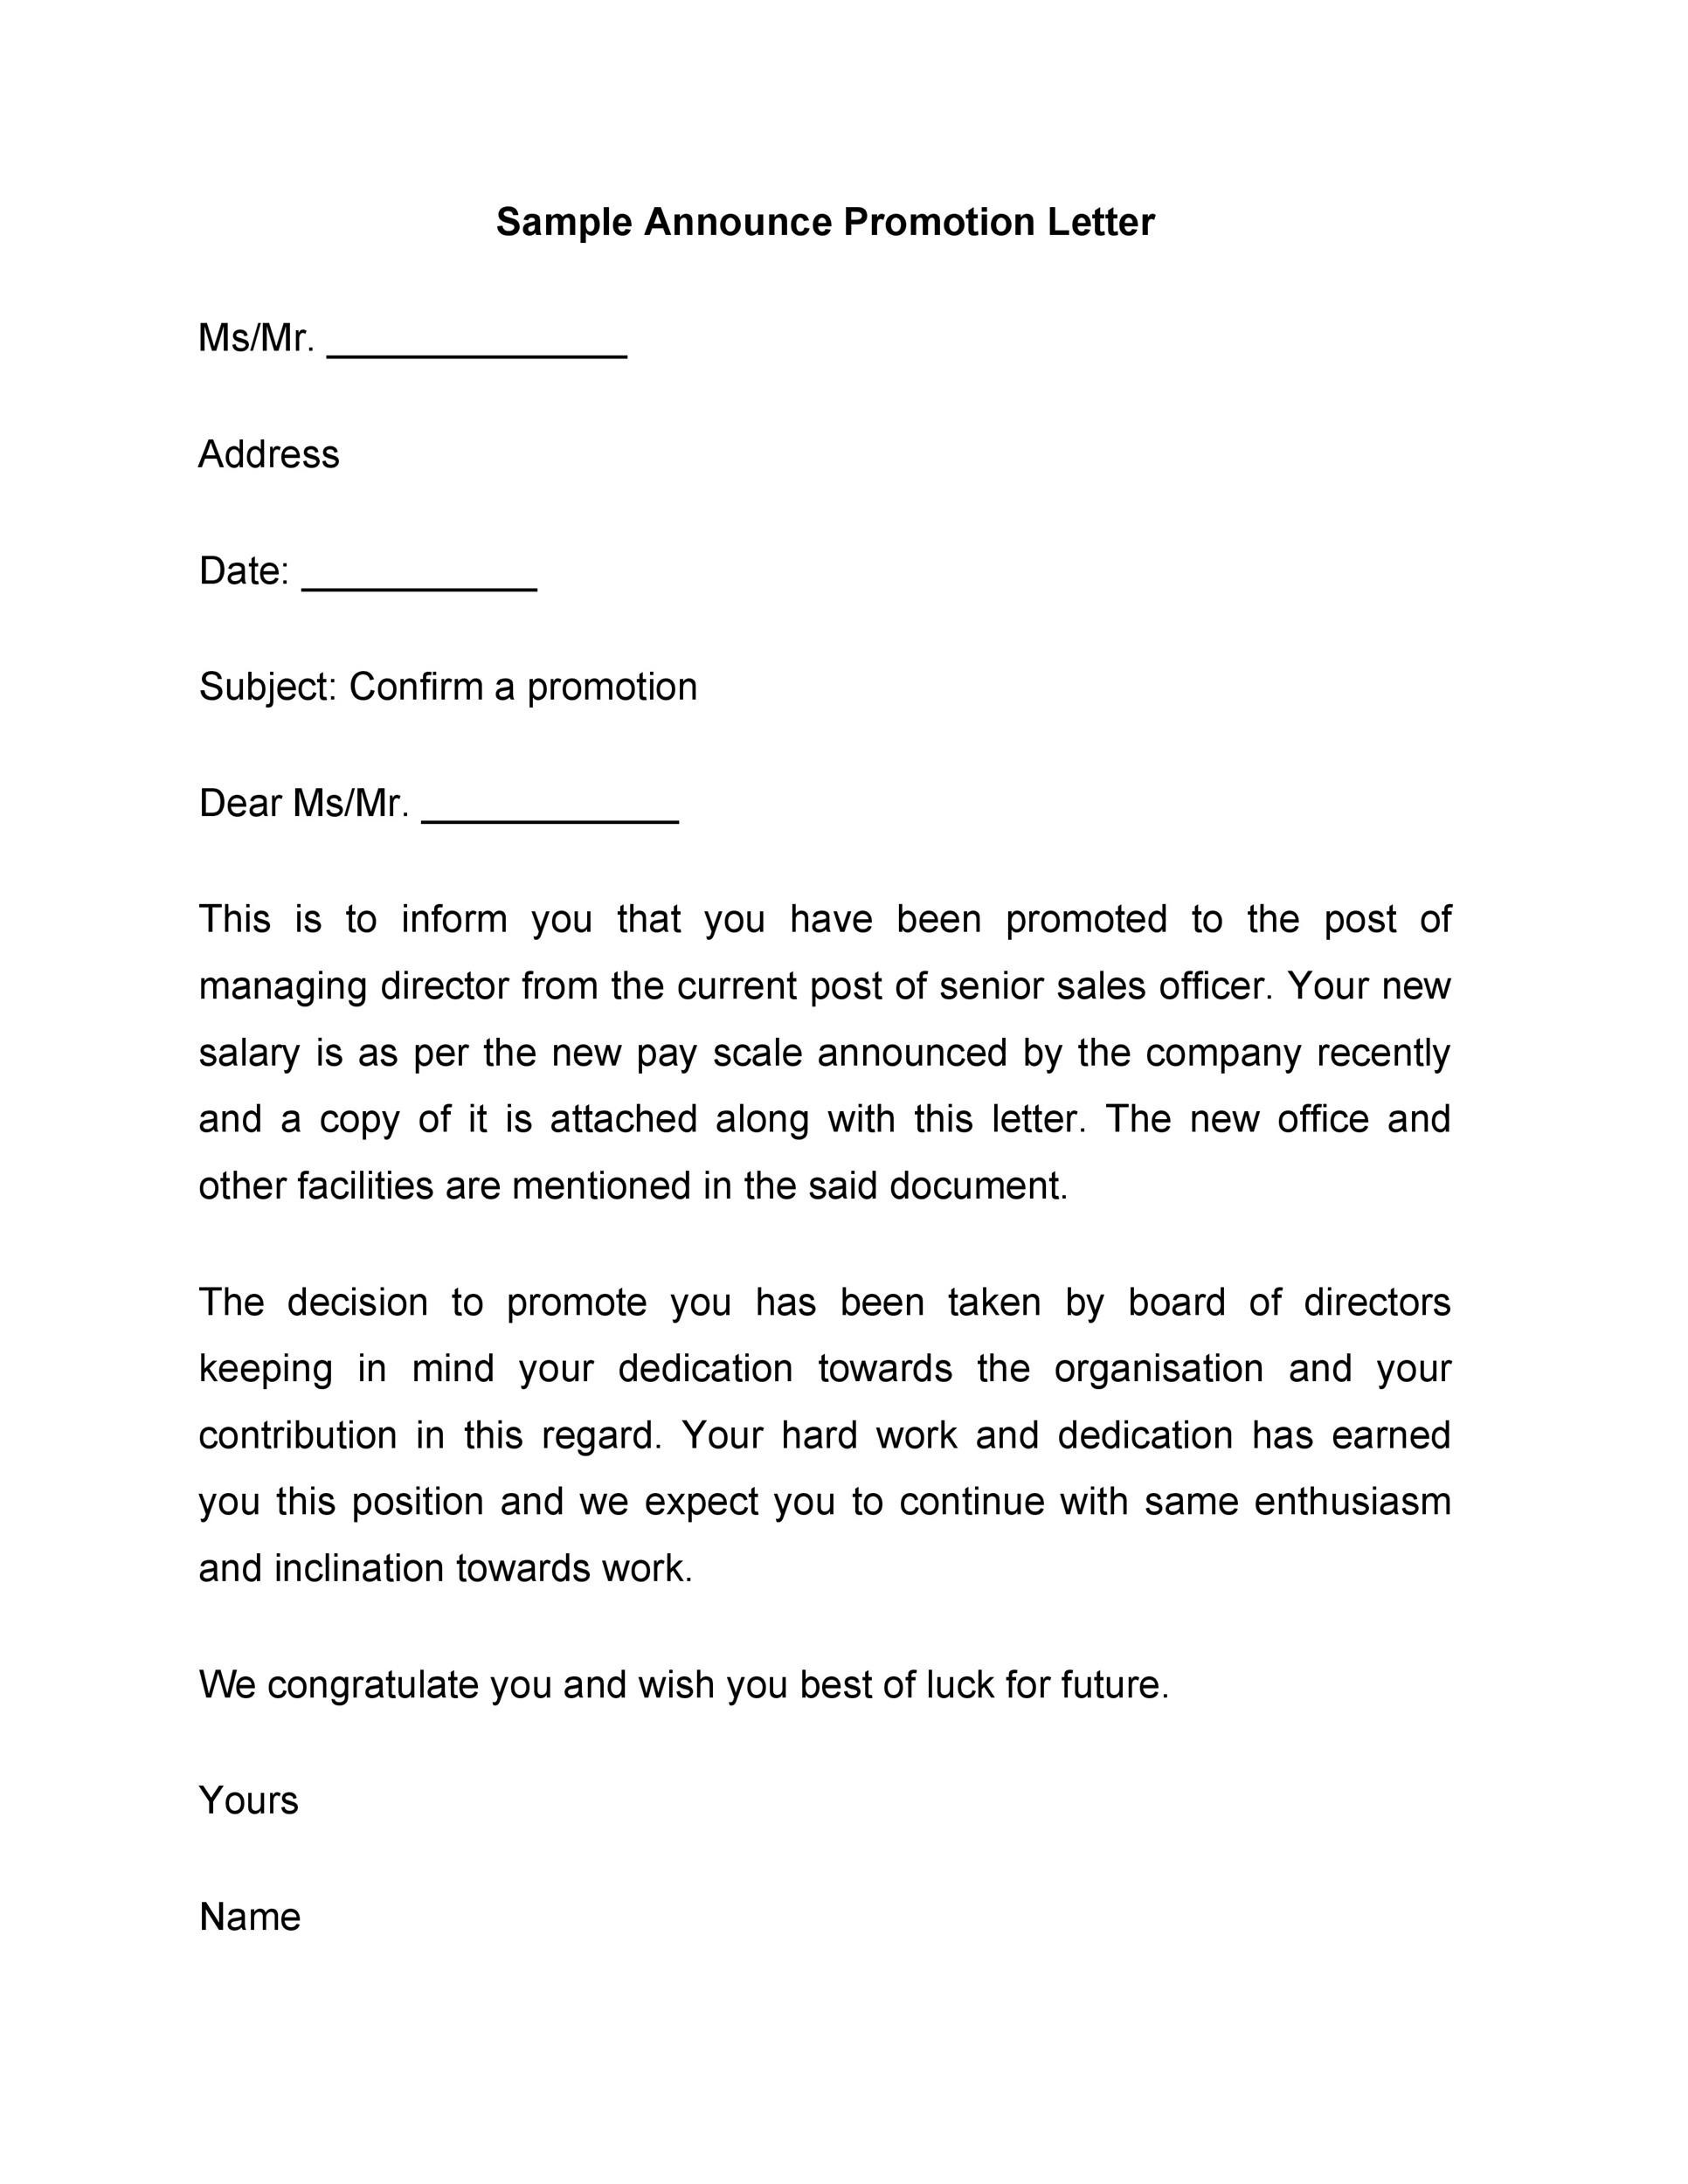 how to write cover letter for promotion